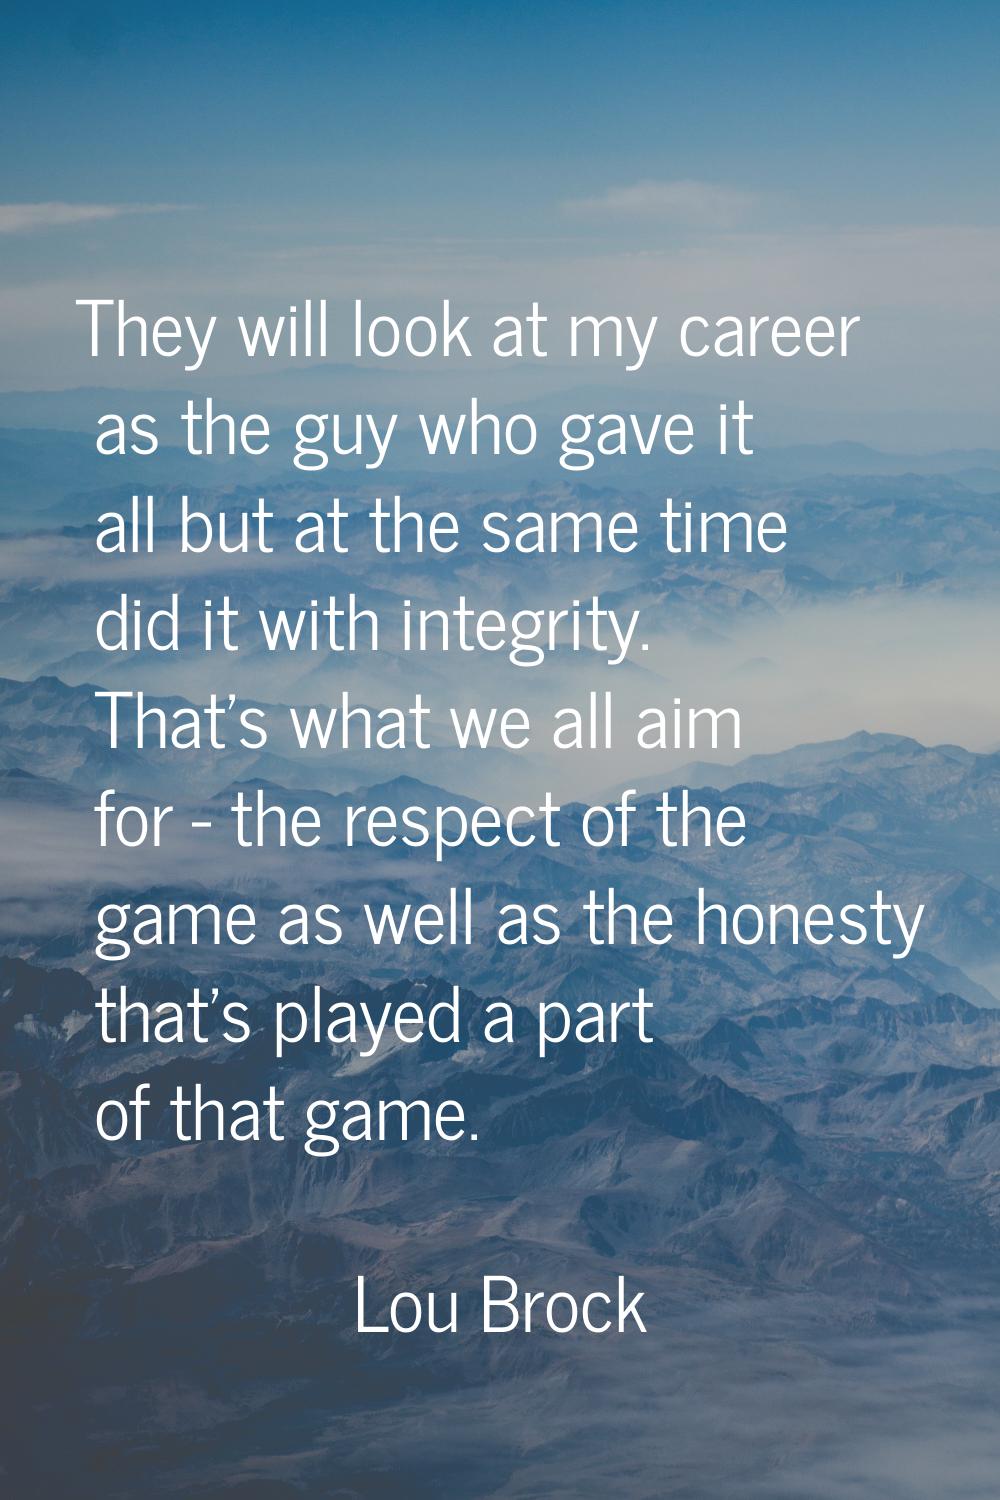 They will look at my career as the guy who gave it all but at the same time did it with integrity. 